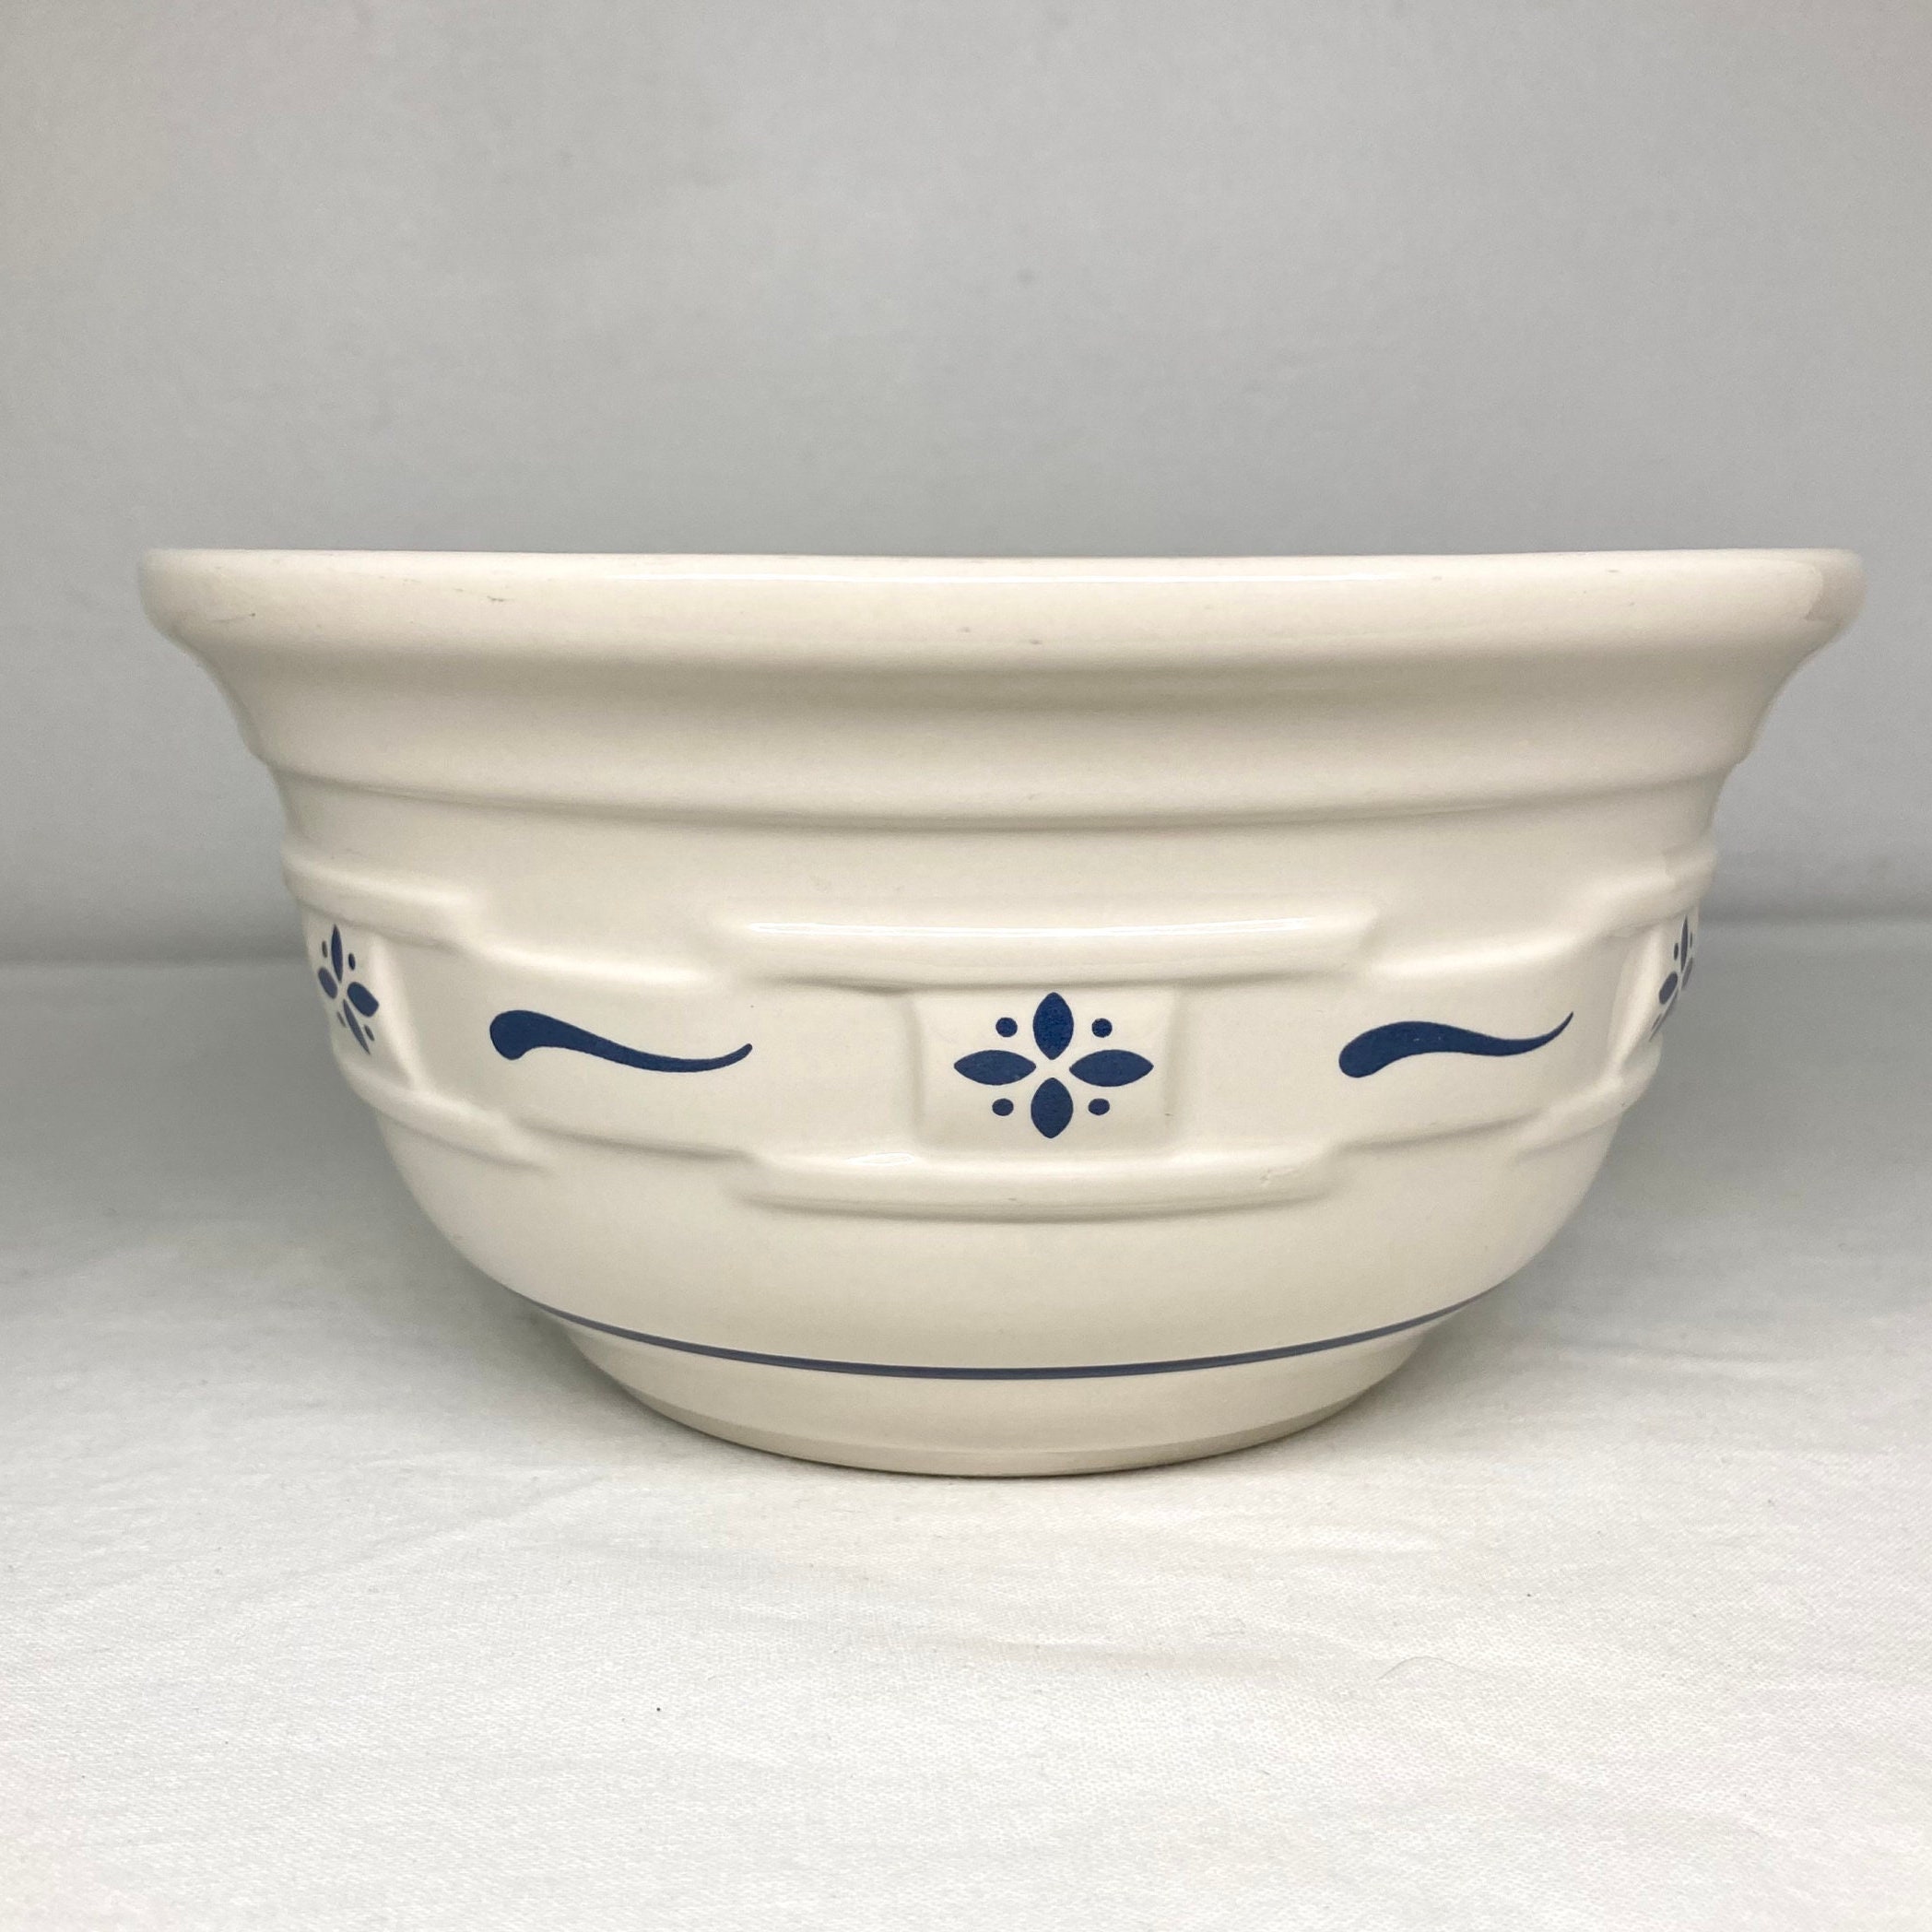 Longaberger Woven Traditions Classic Blue Pottery 11 Inch Mixing Bowl